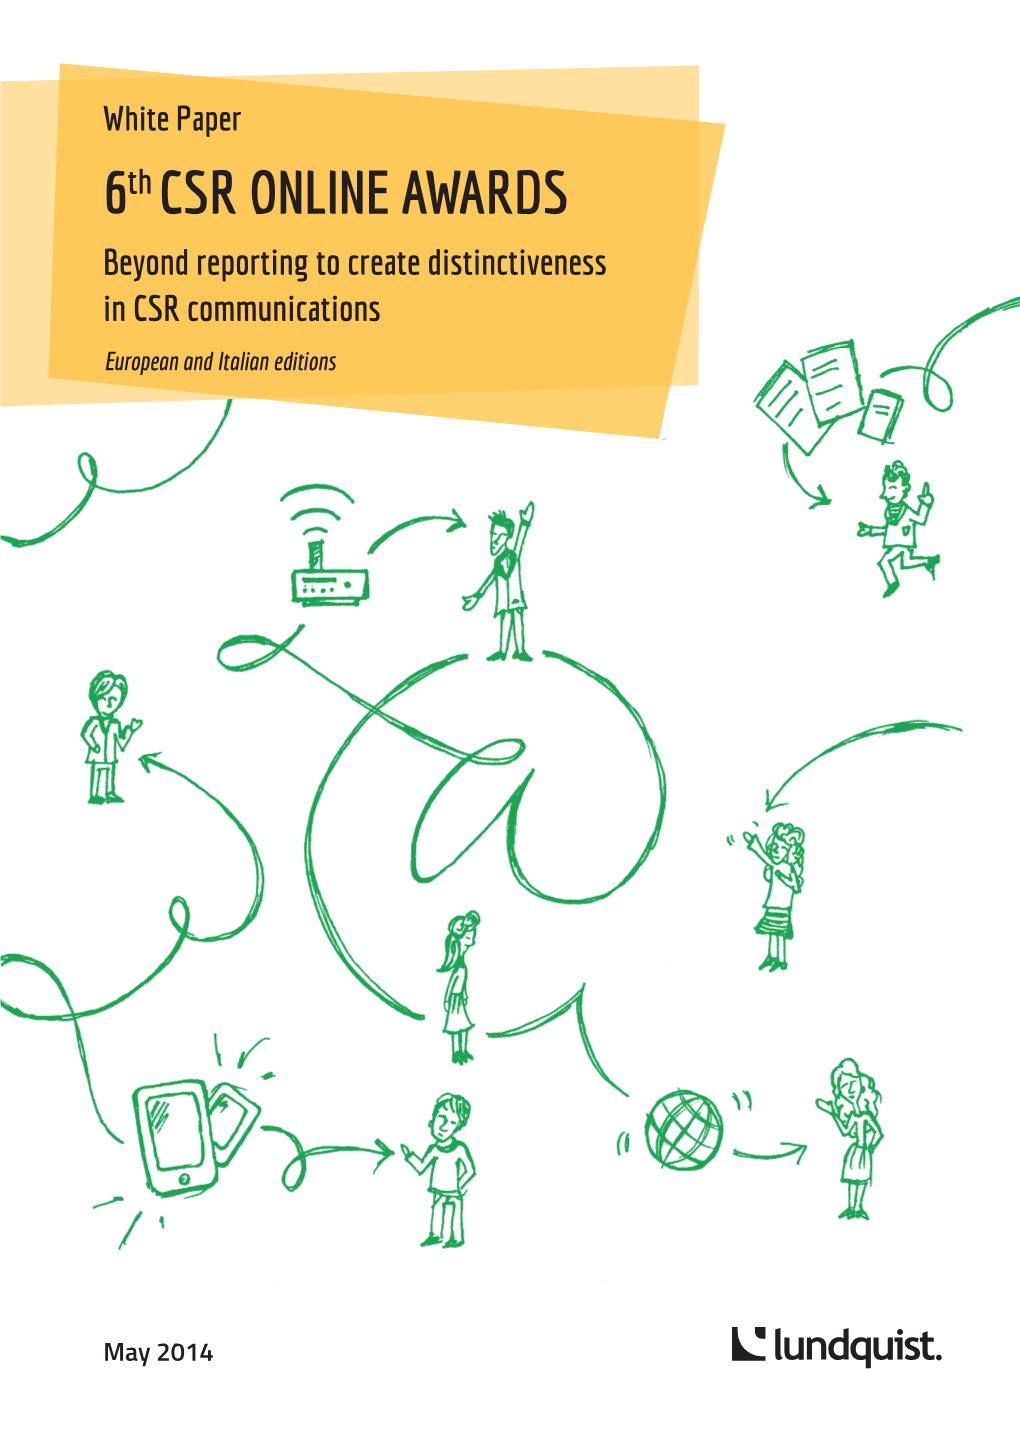 6Th CSR ONLINE AWARDS Beyond Reporting to Create Distinctiveness in CSR Communications European and Italian Editions